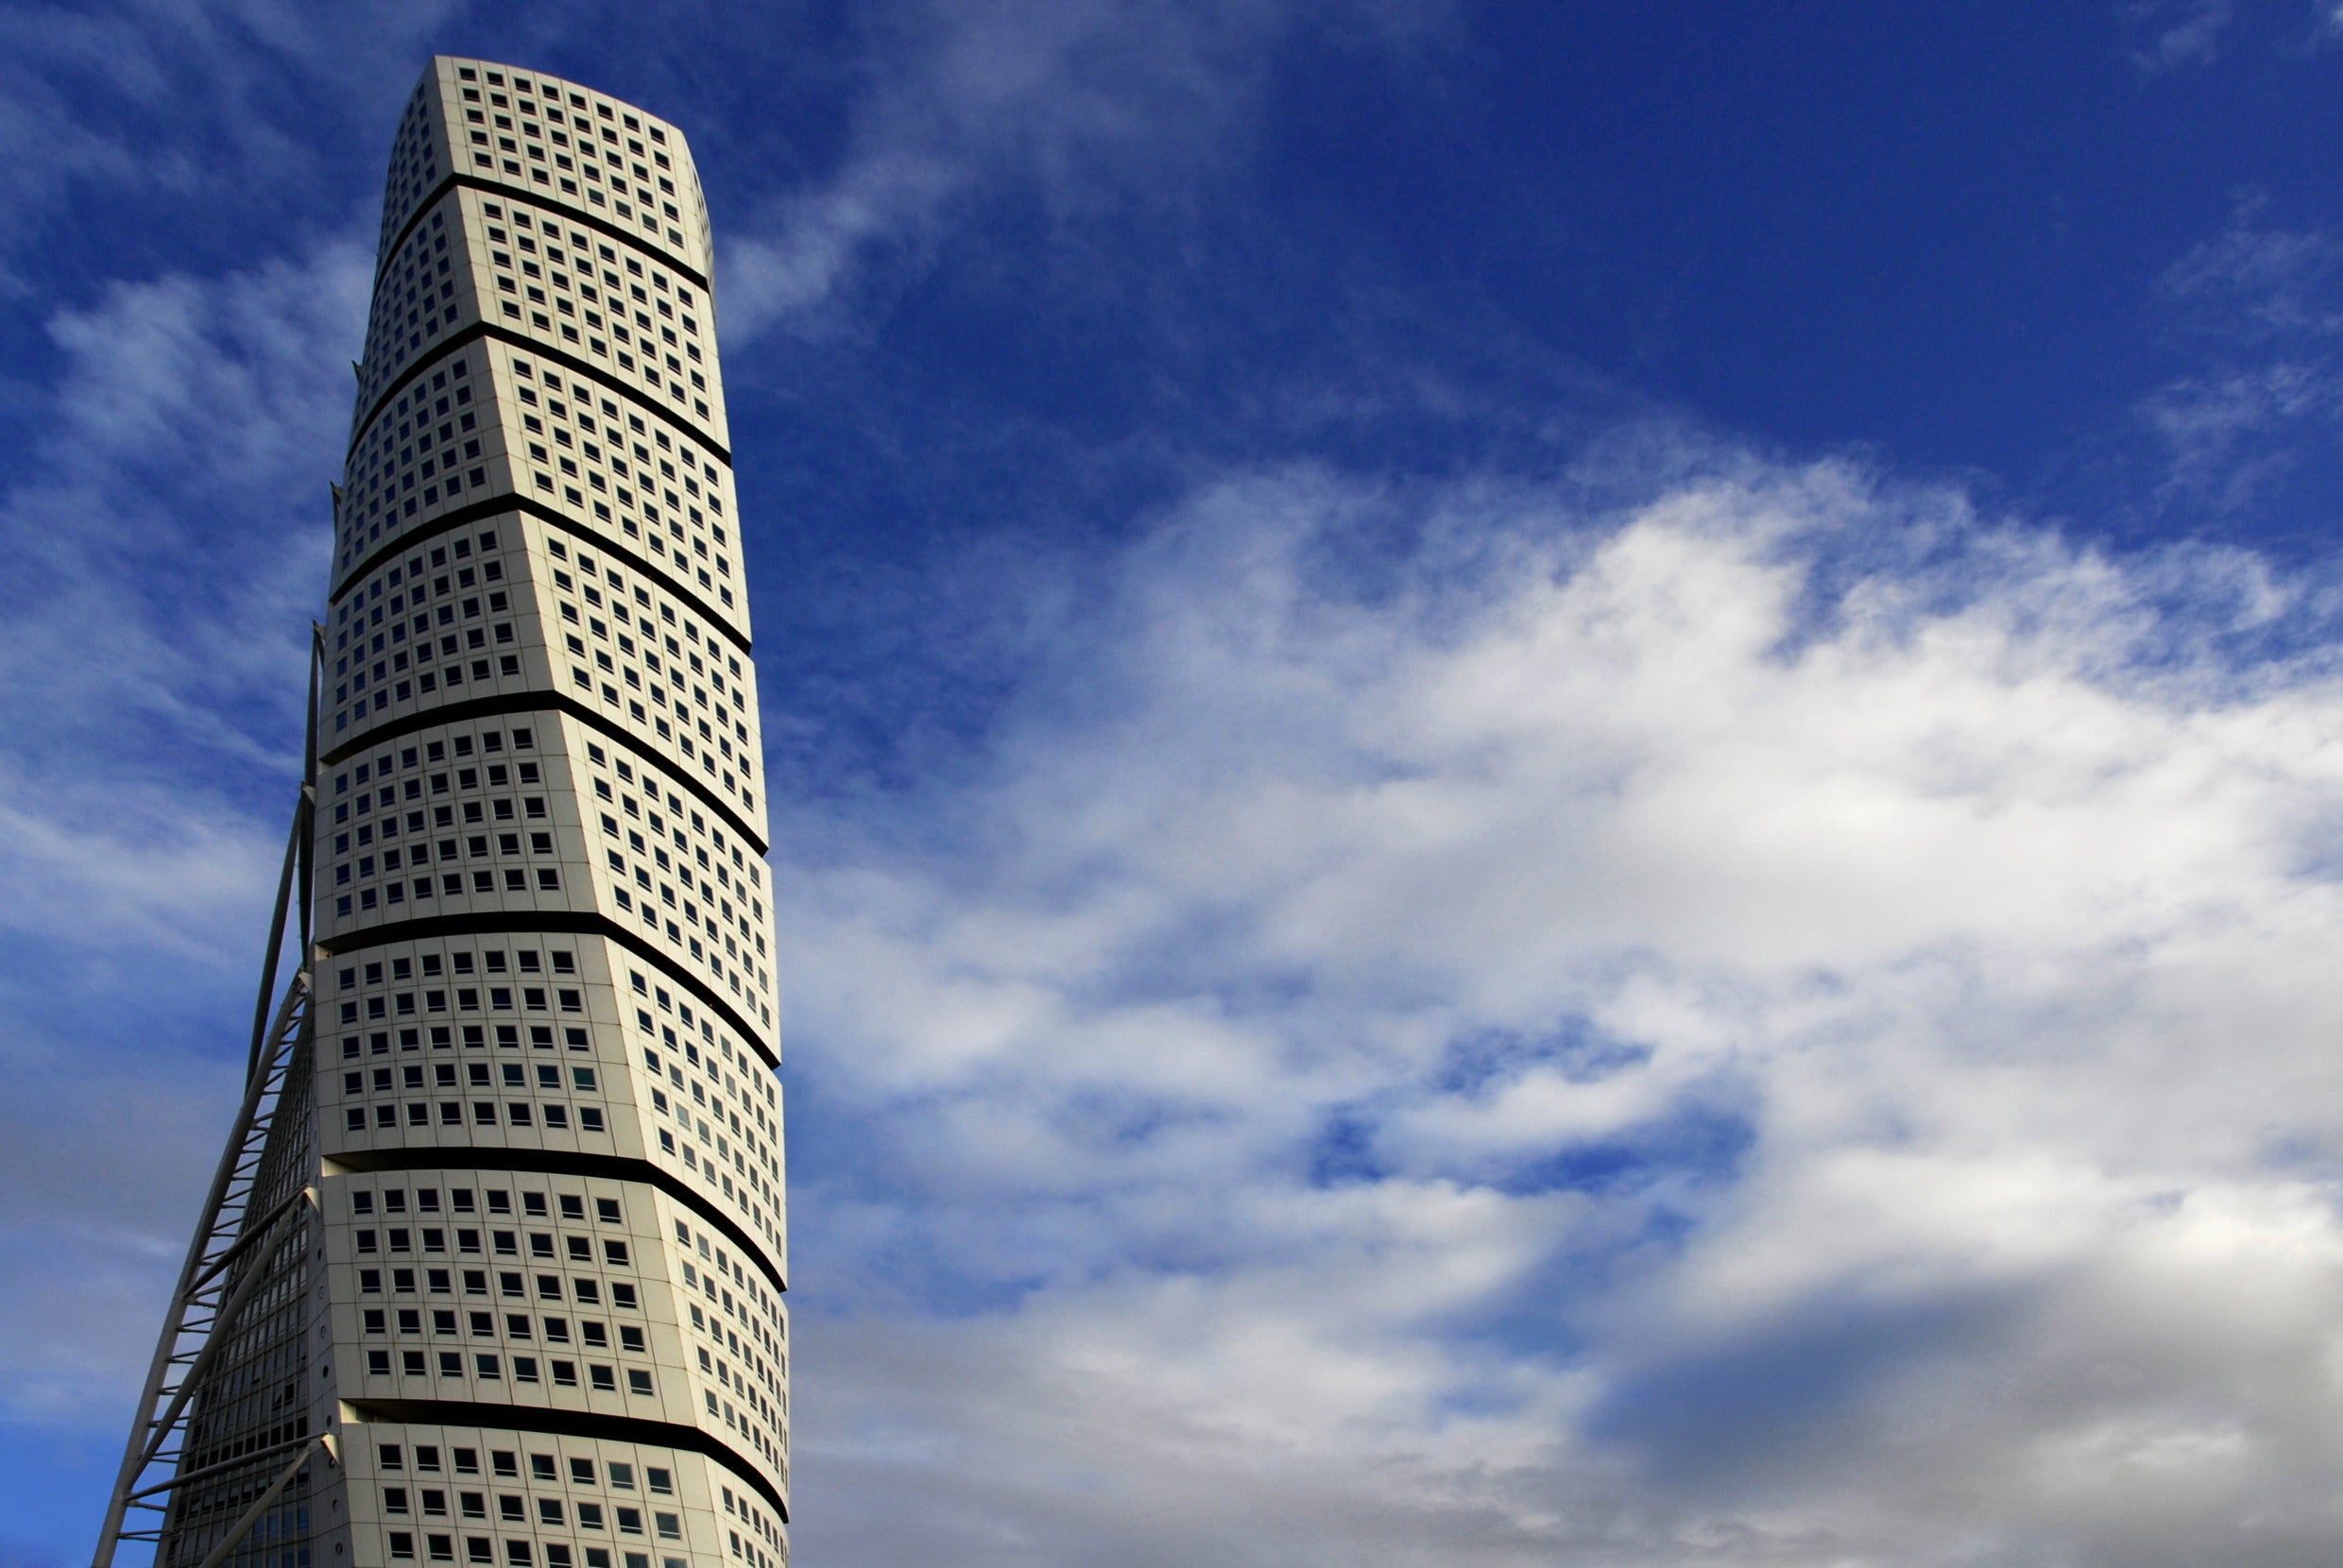 The ‘Turning Torso’ is the highest skyscraper in Scandinavia